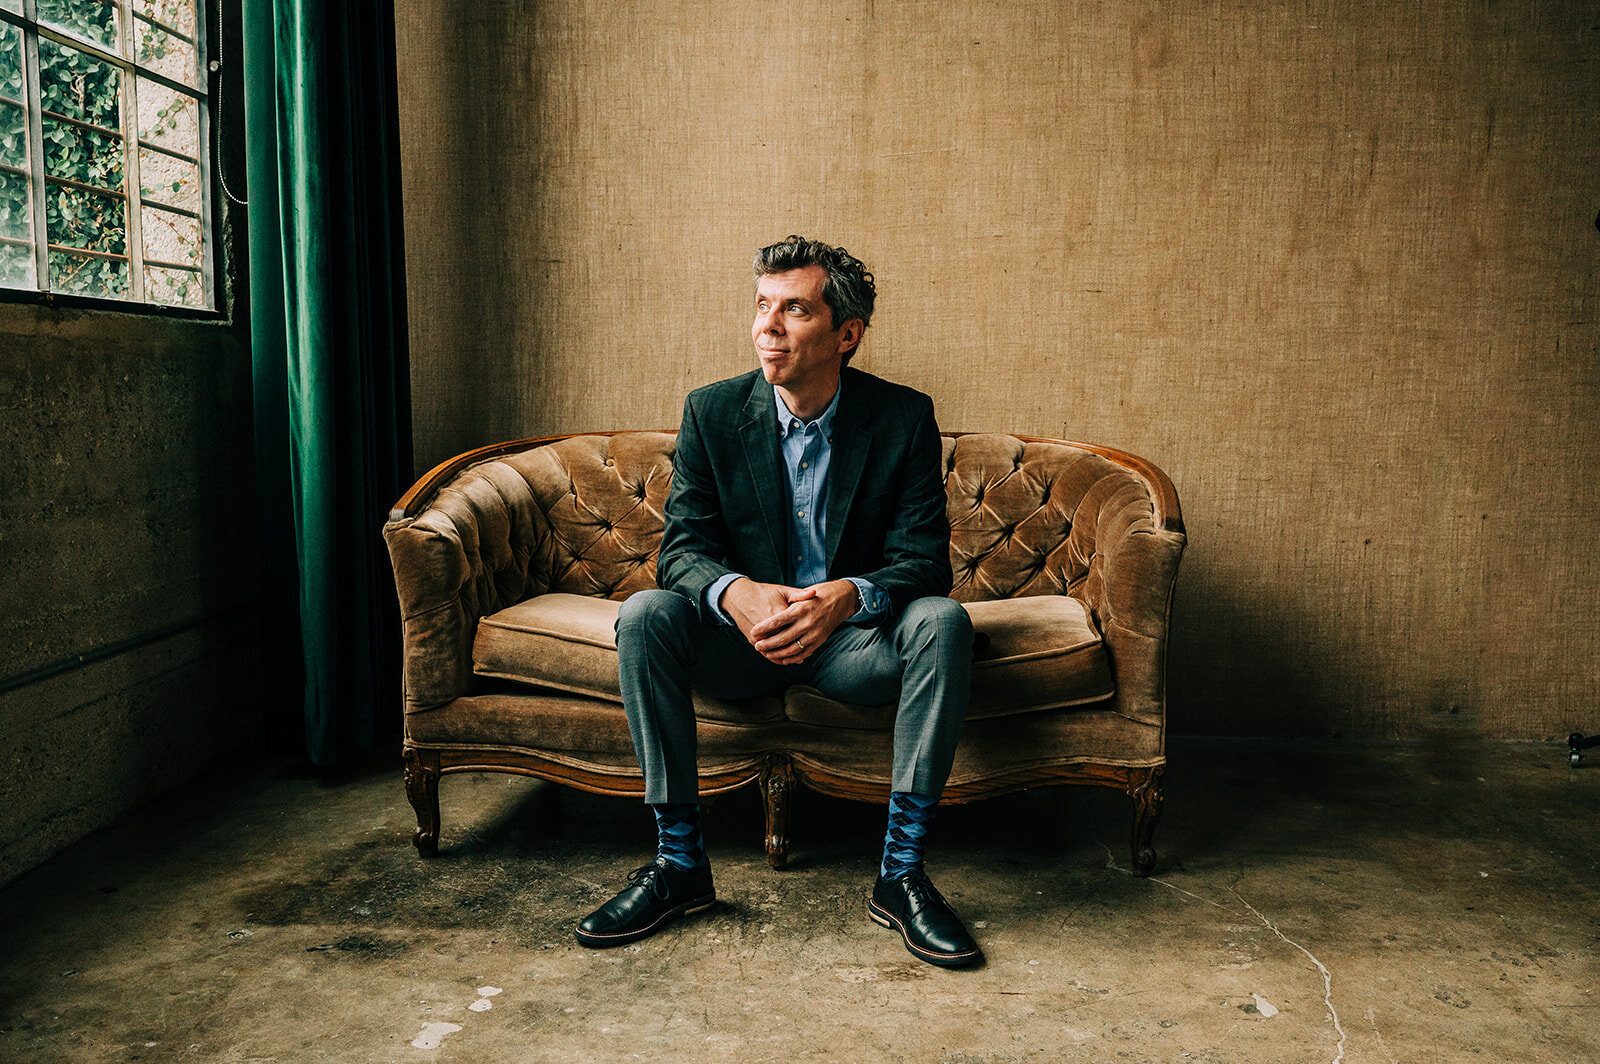 moody portrait of man in a suit sitting on a couch